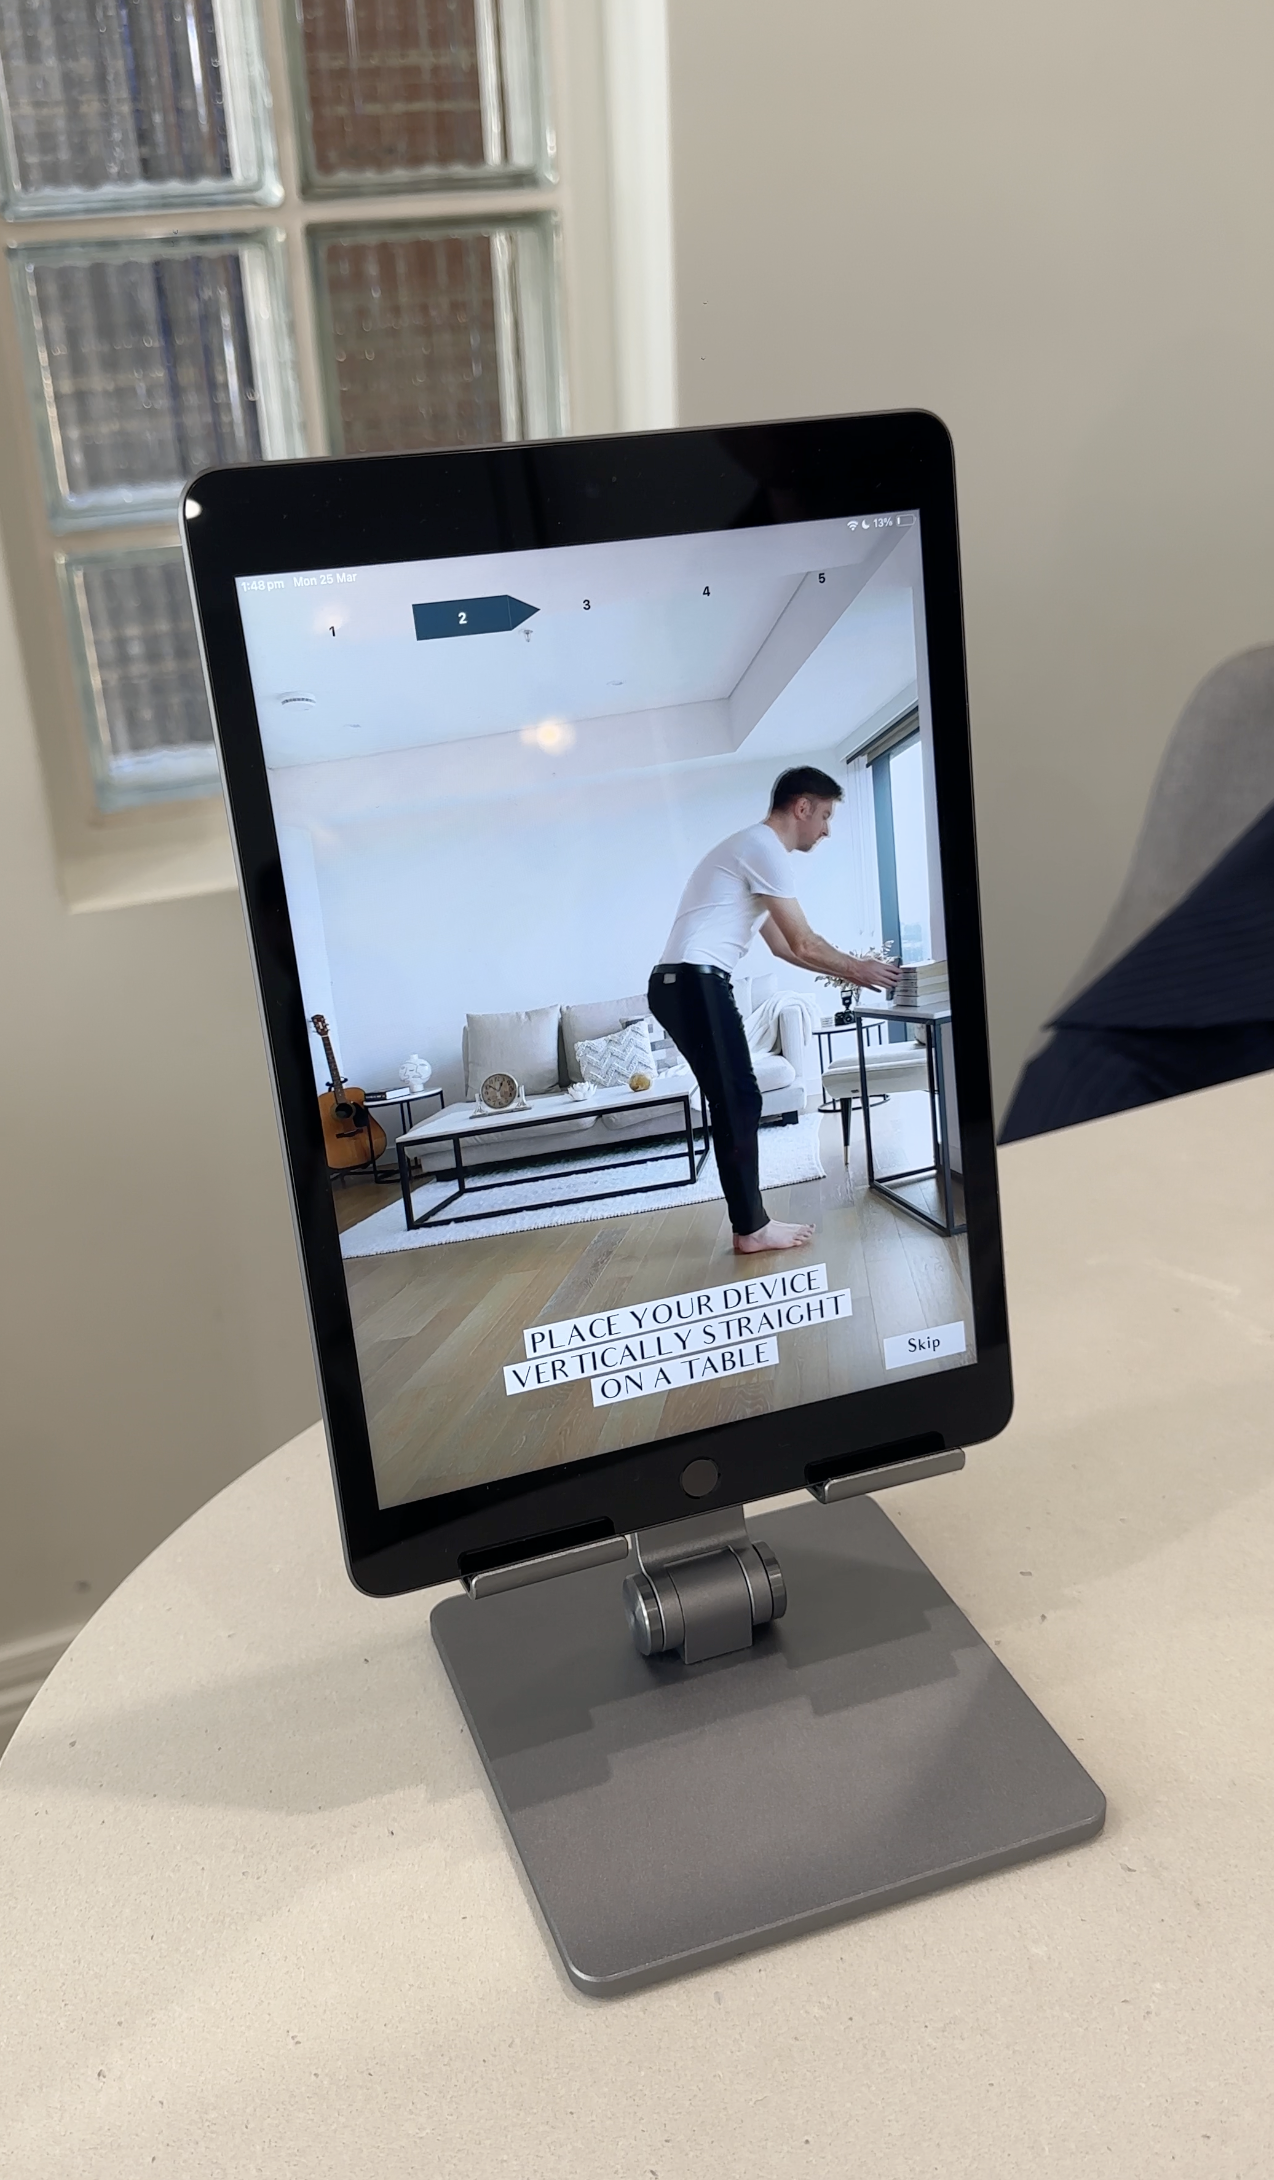 A man on a digital device screen performing a step as part of a virtual setup process, with an instruction overlay